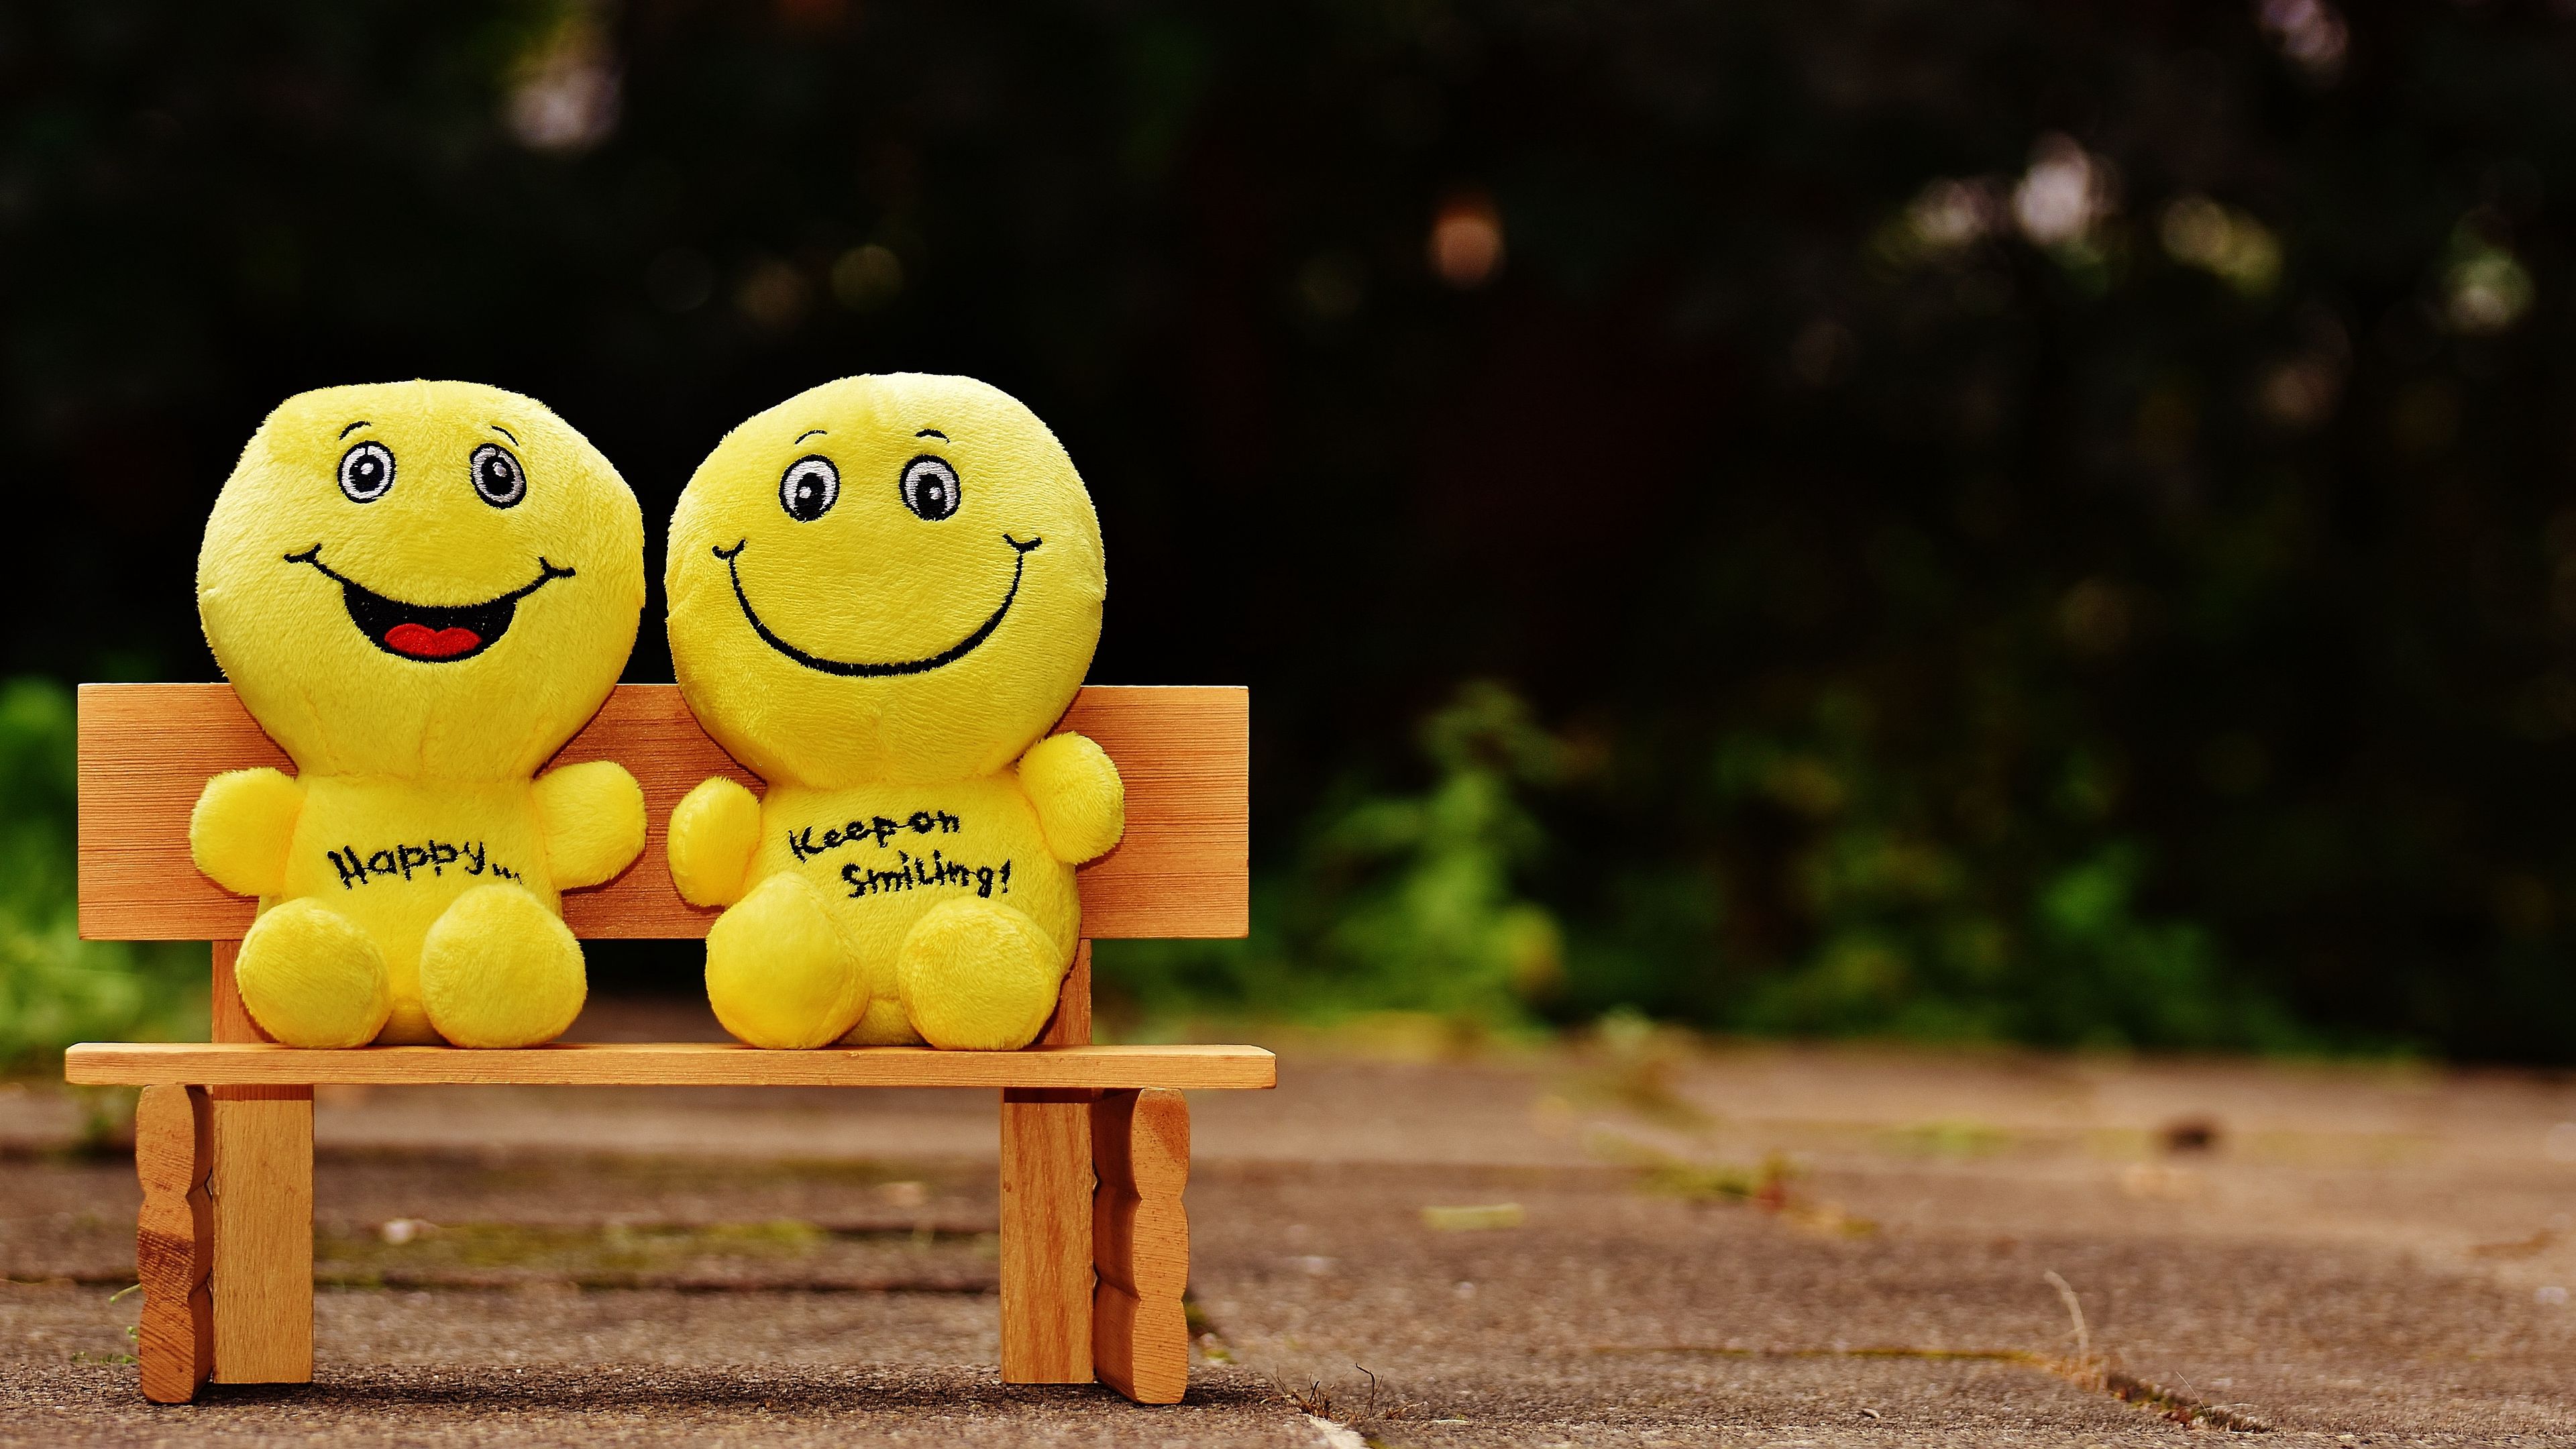 Download wallpaper 3840x2160 smiles, happy, cheerful, smile, bench